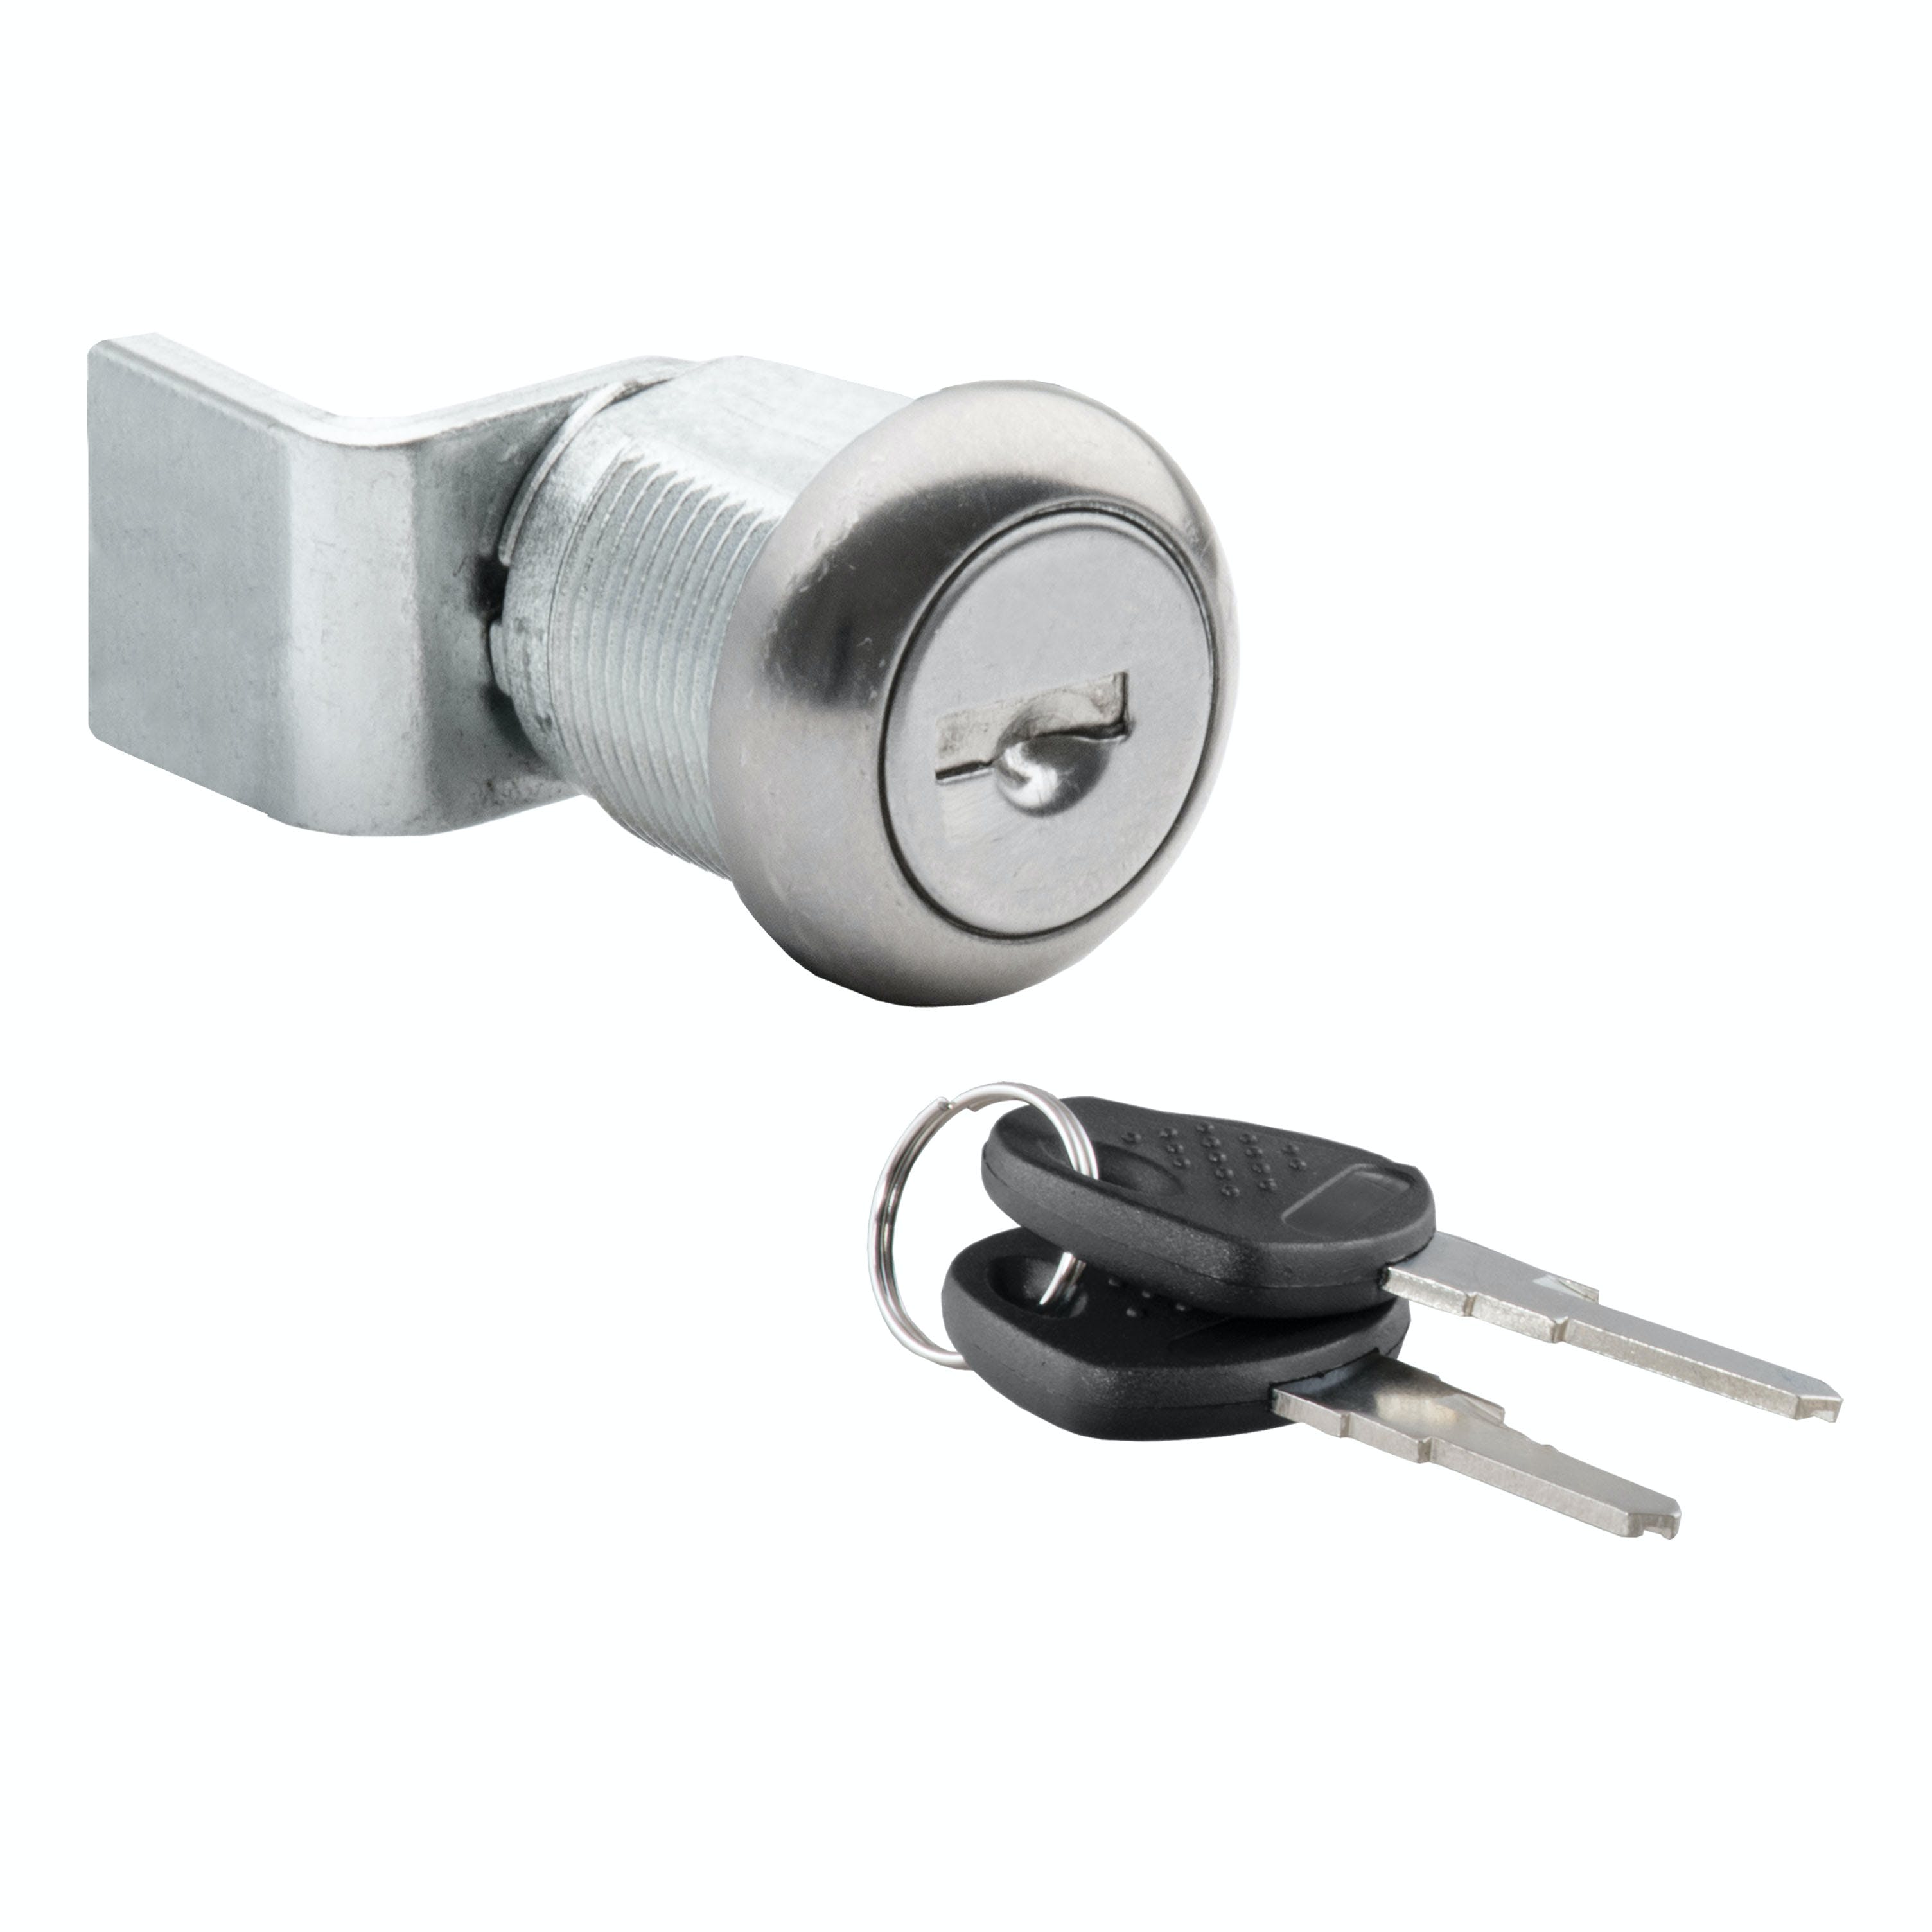 UWS 003-RYTHCY-010 Replacement T-Handle Lock Cylinder and Keys